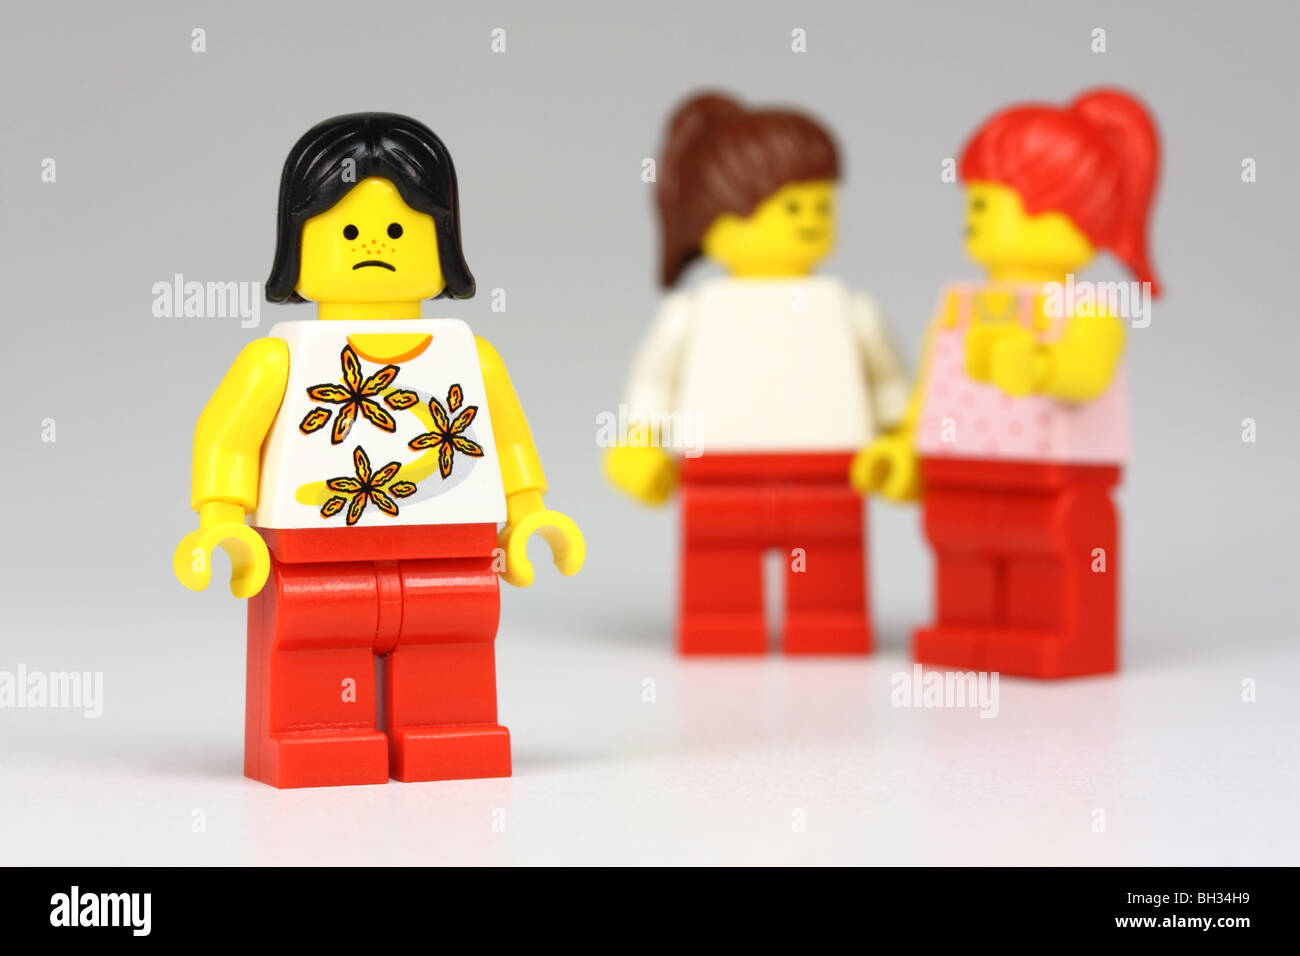 Unhappy lego girl, with 2 other lego girls talking about her behind her back :  isolation/bullying concept Stock Photo